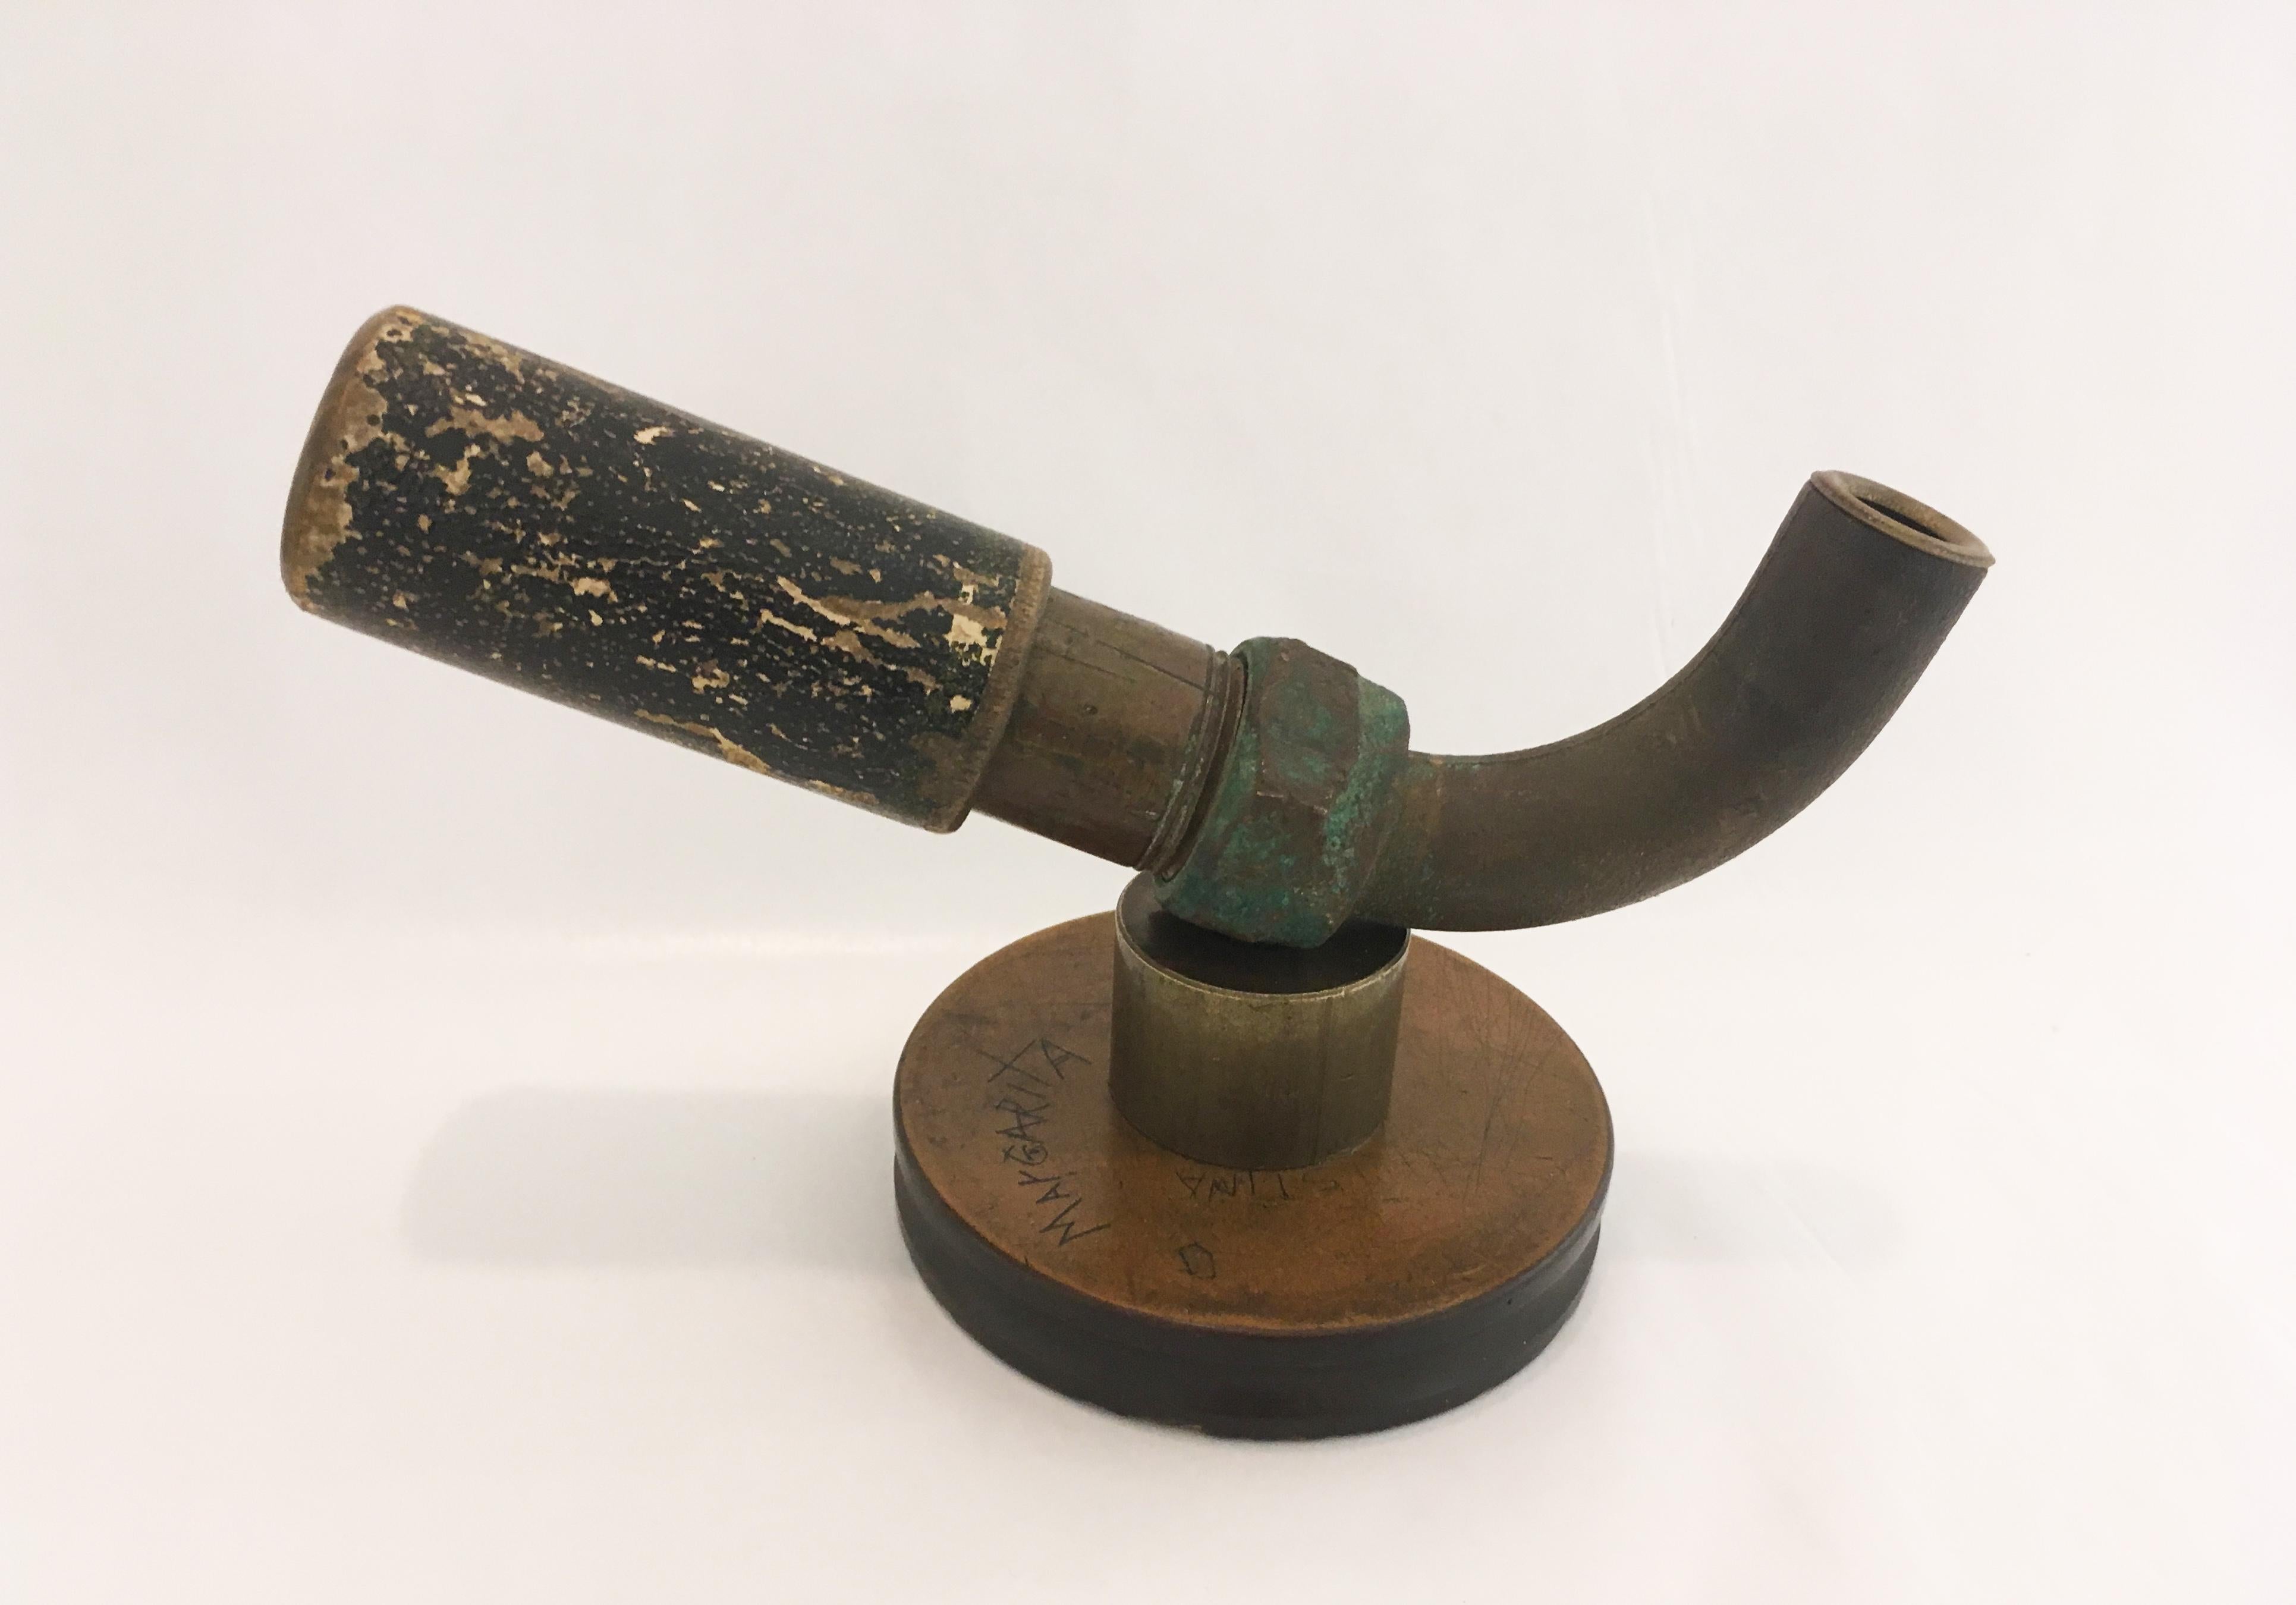 Pas Une Pipe, brass, resin, wood, found object, sculpture, abstract - Contemporary Mixed Media Art by C. T. Bray